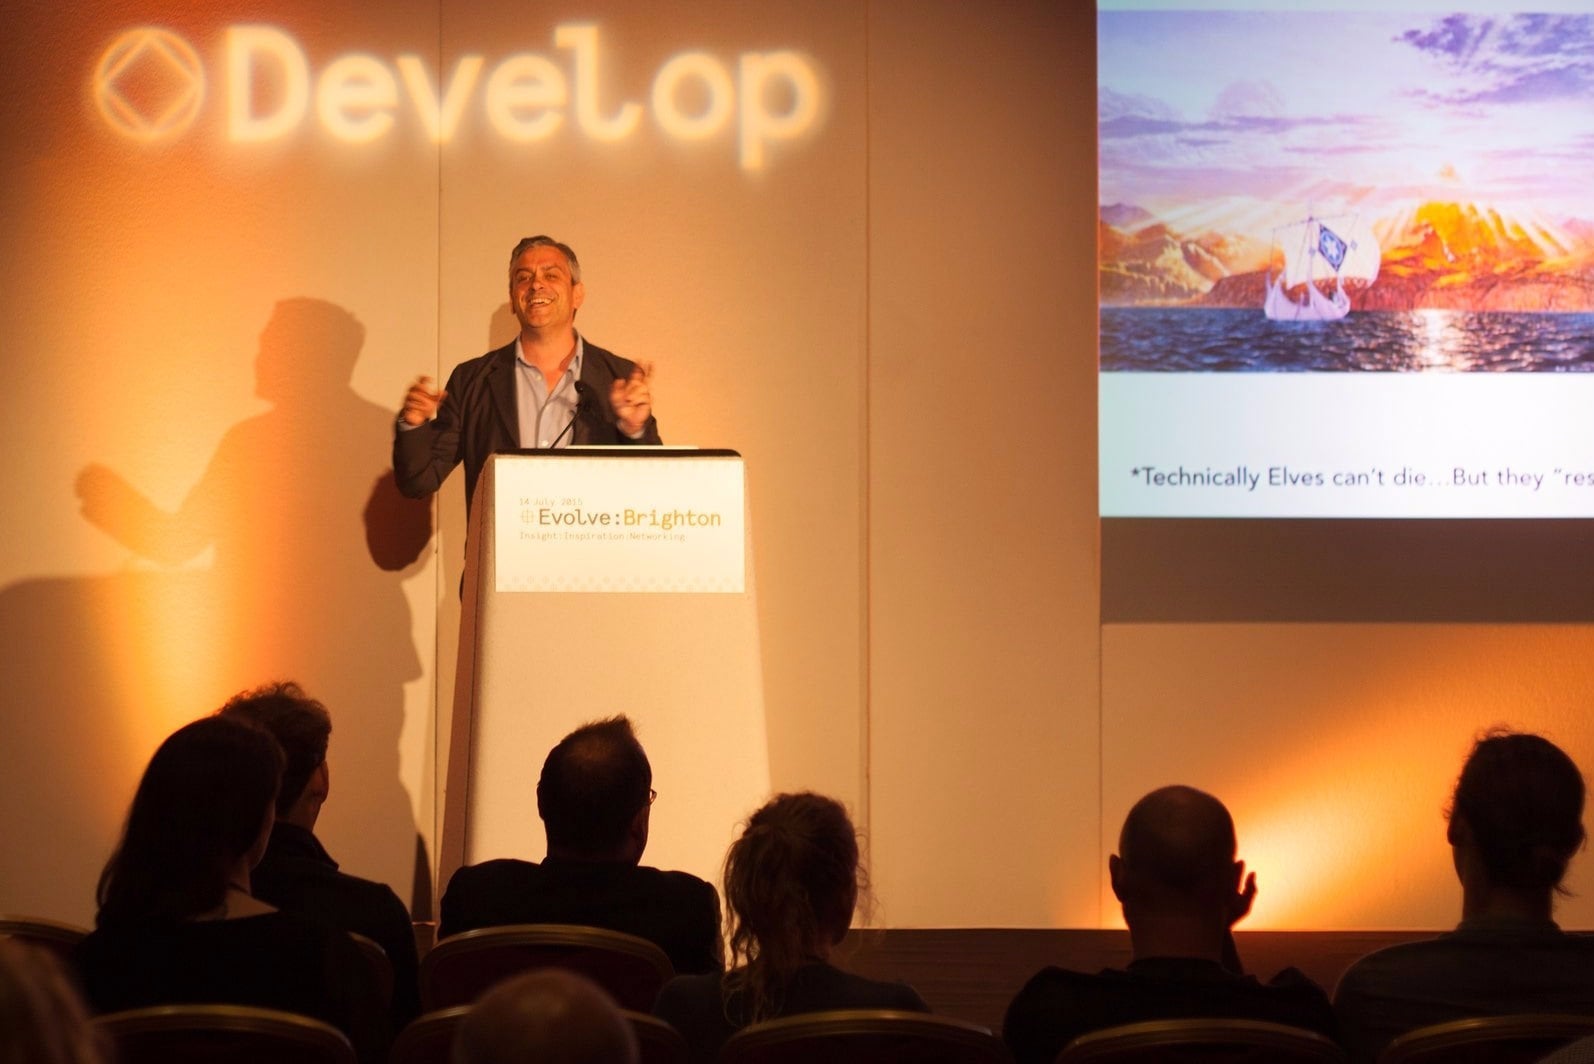 Image for Develop in Brighton speaker submissions close today